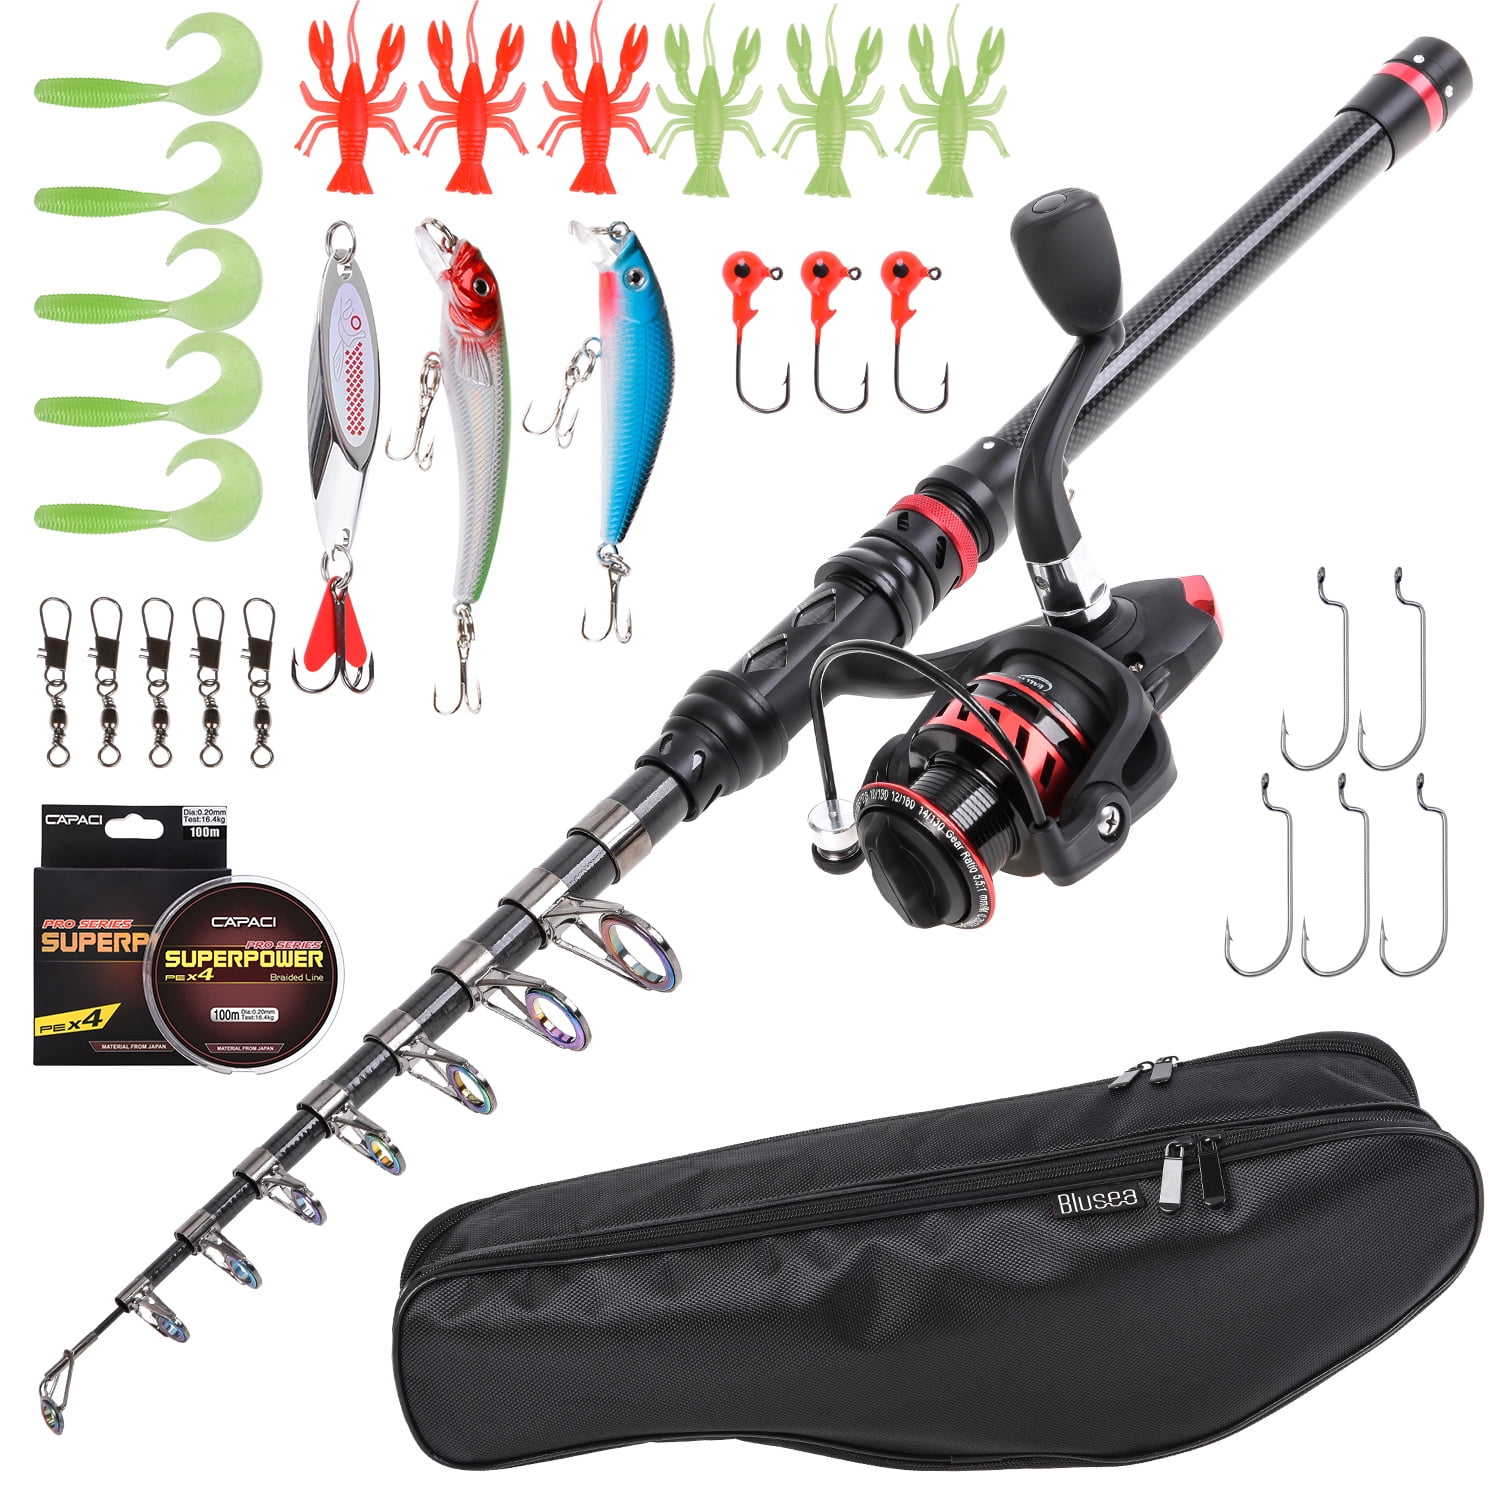 Details about   Carbon Fiber Telescopic Fishing Rod Travel Sea Spinning Pole Reel Combo Kit 3m 